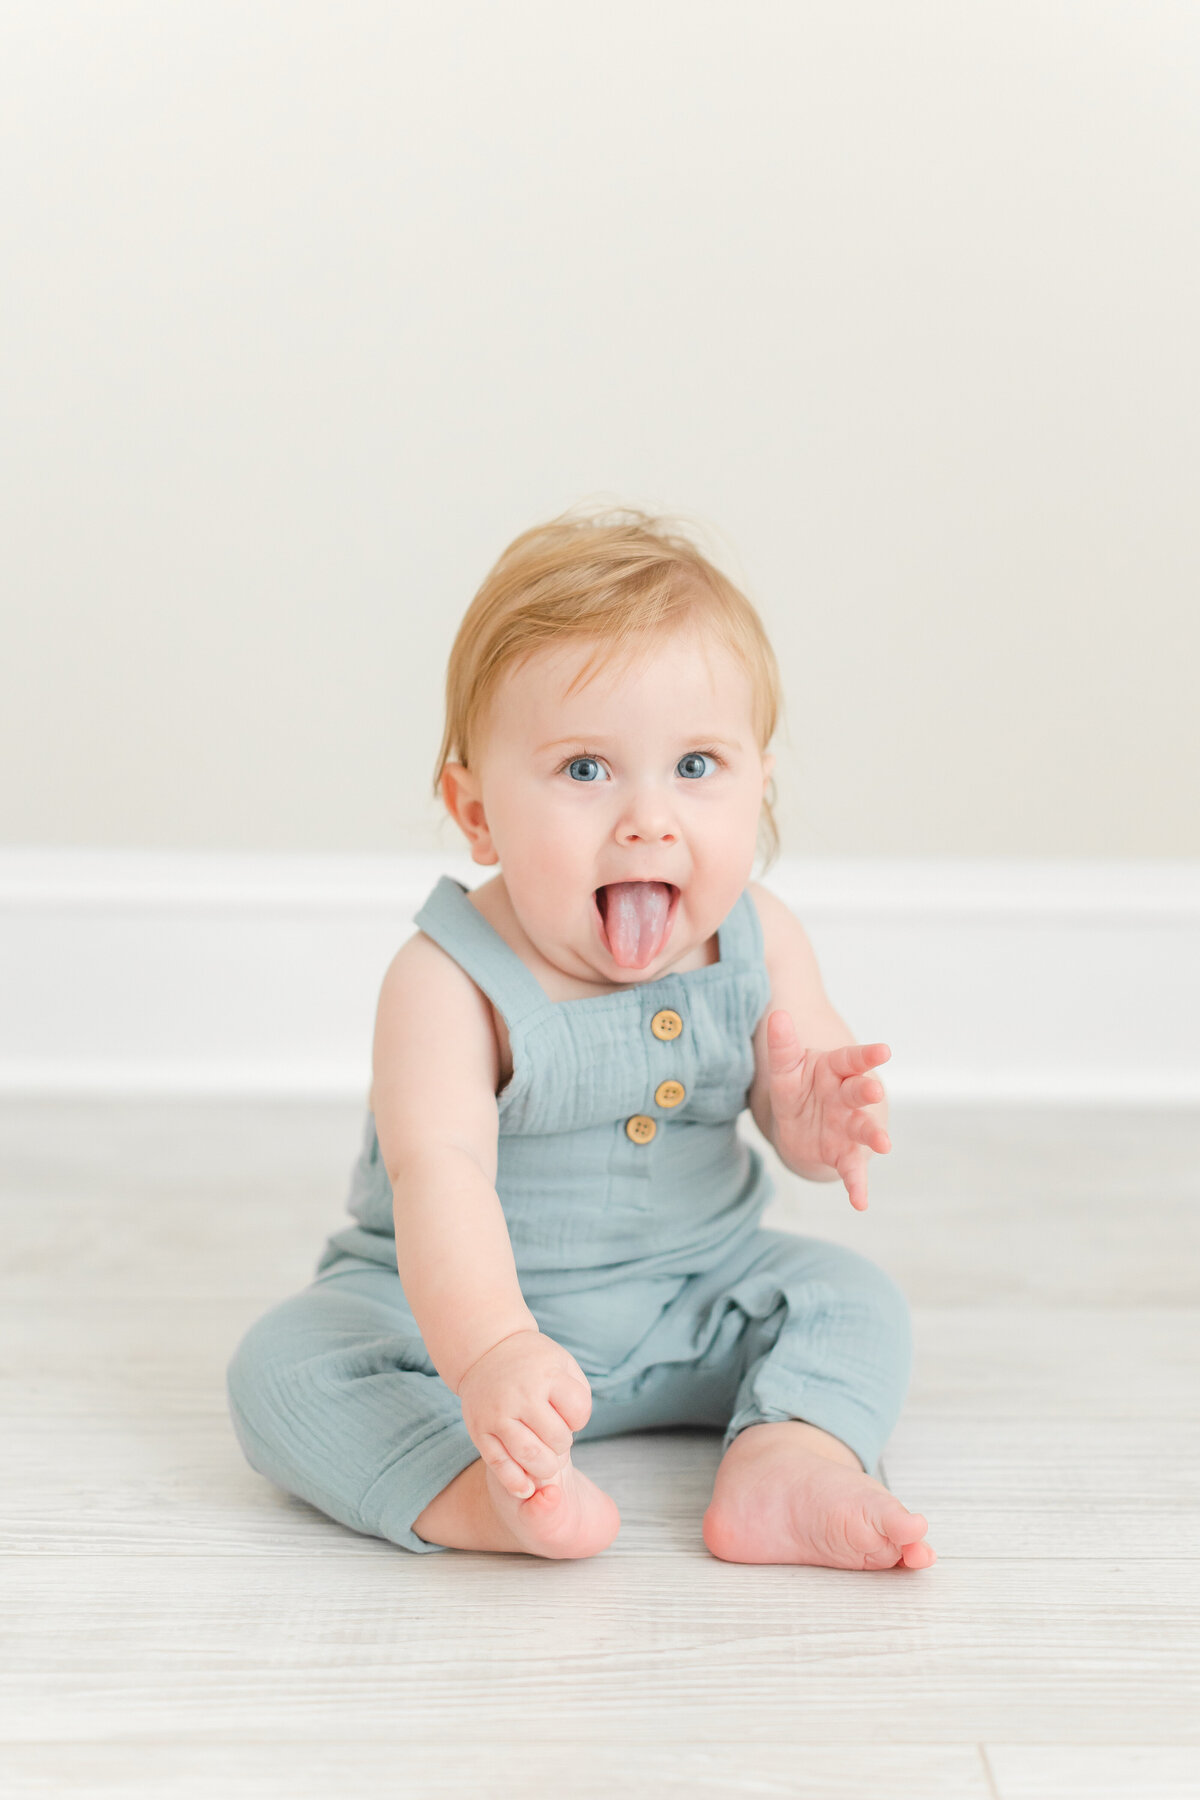 A Baby Photography photo in Northern Virginia of a silly baby boy sitting on the floor sticking his tongue out